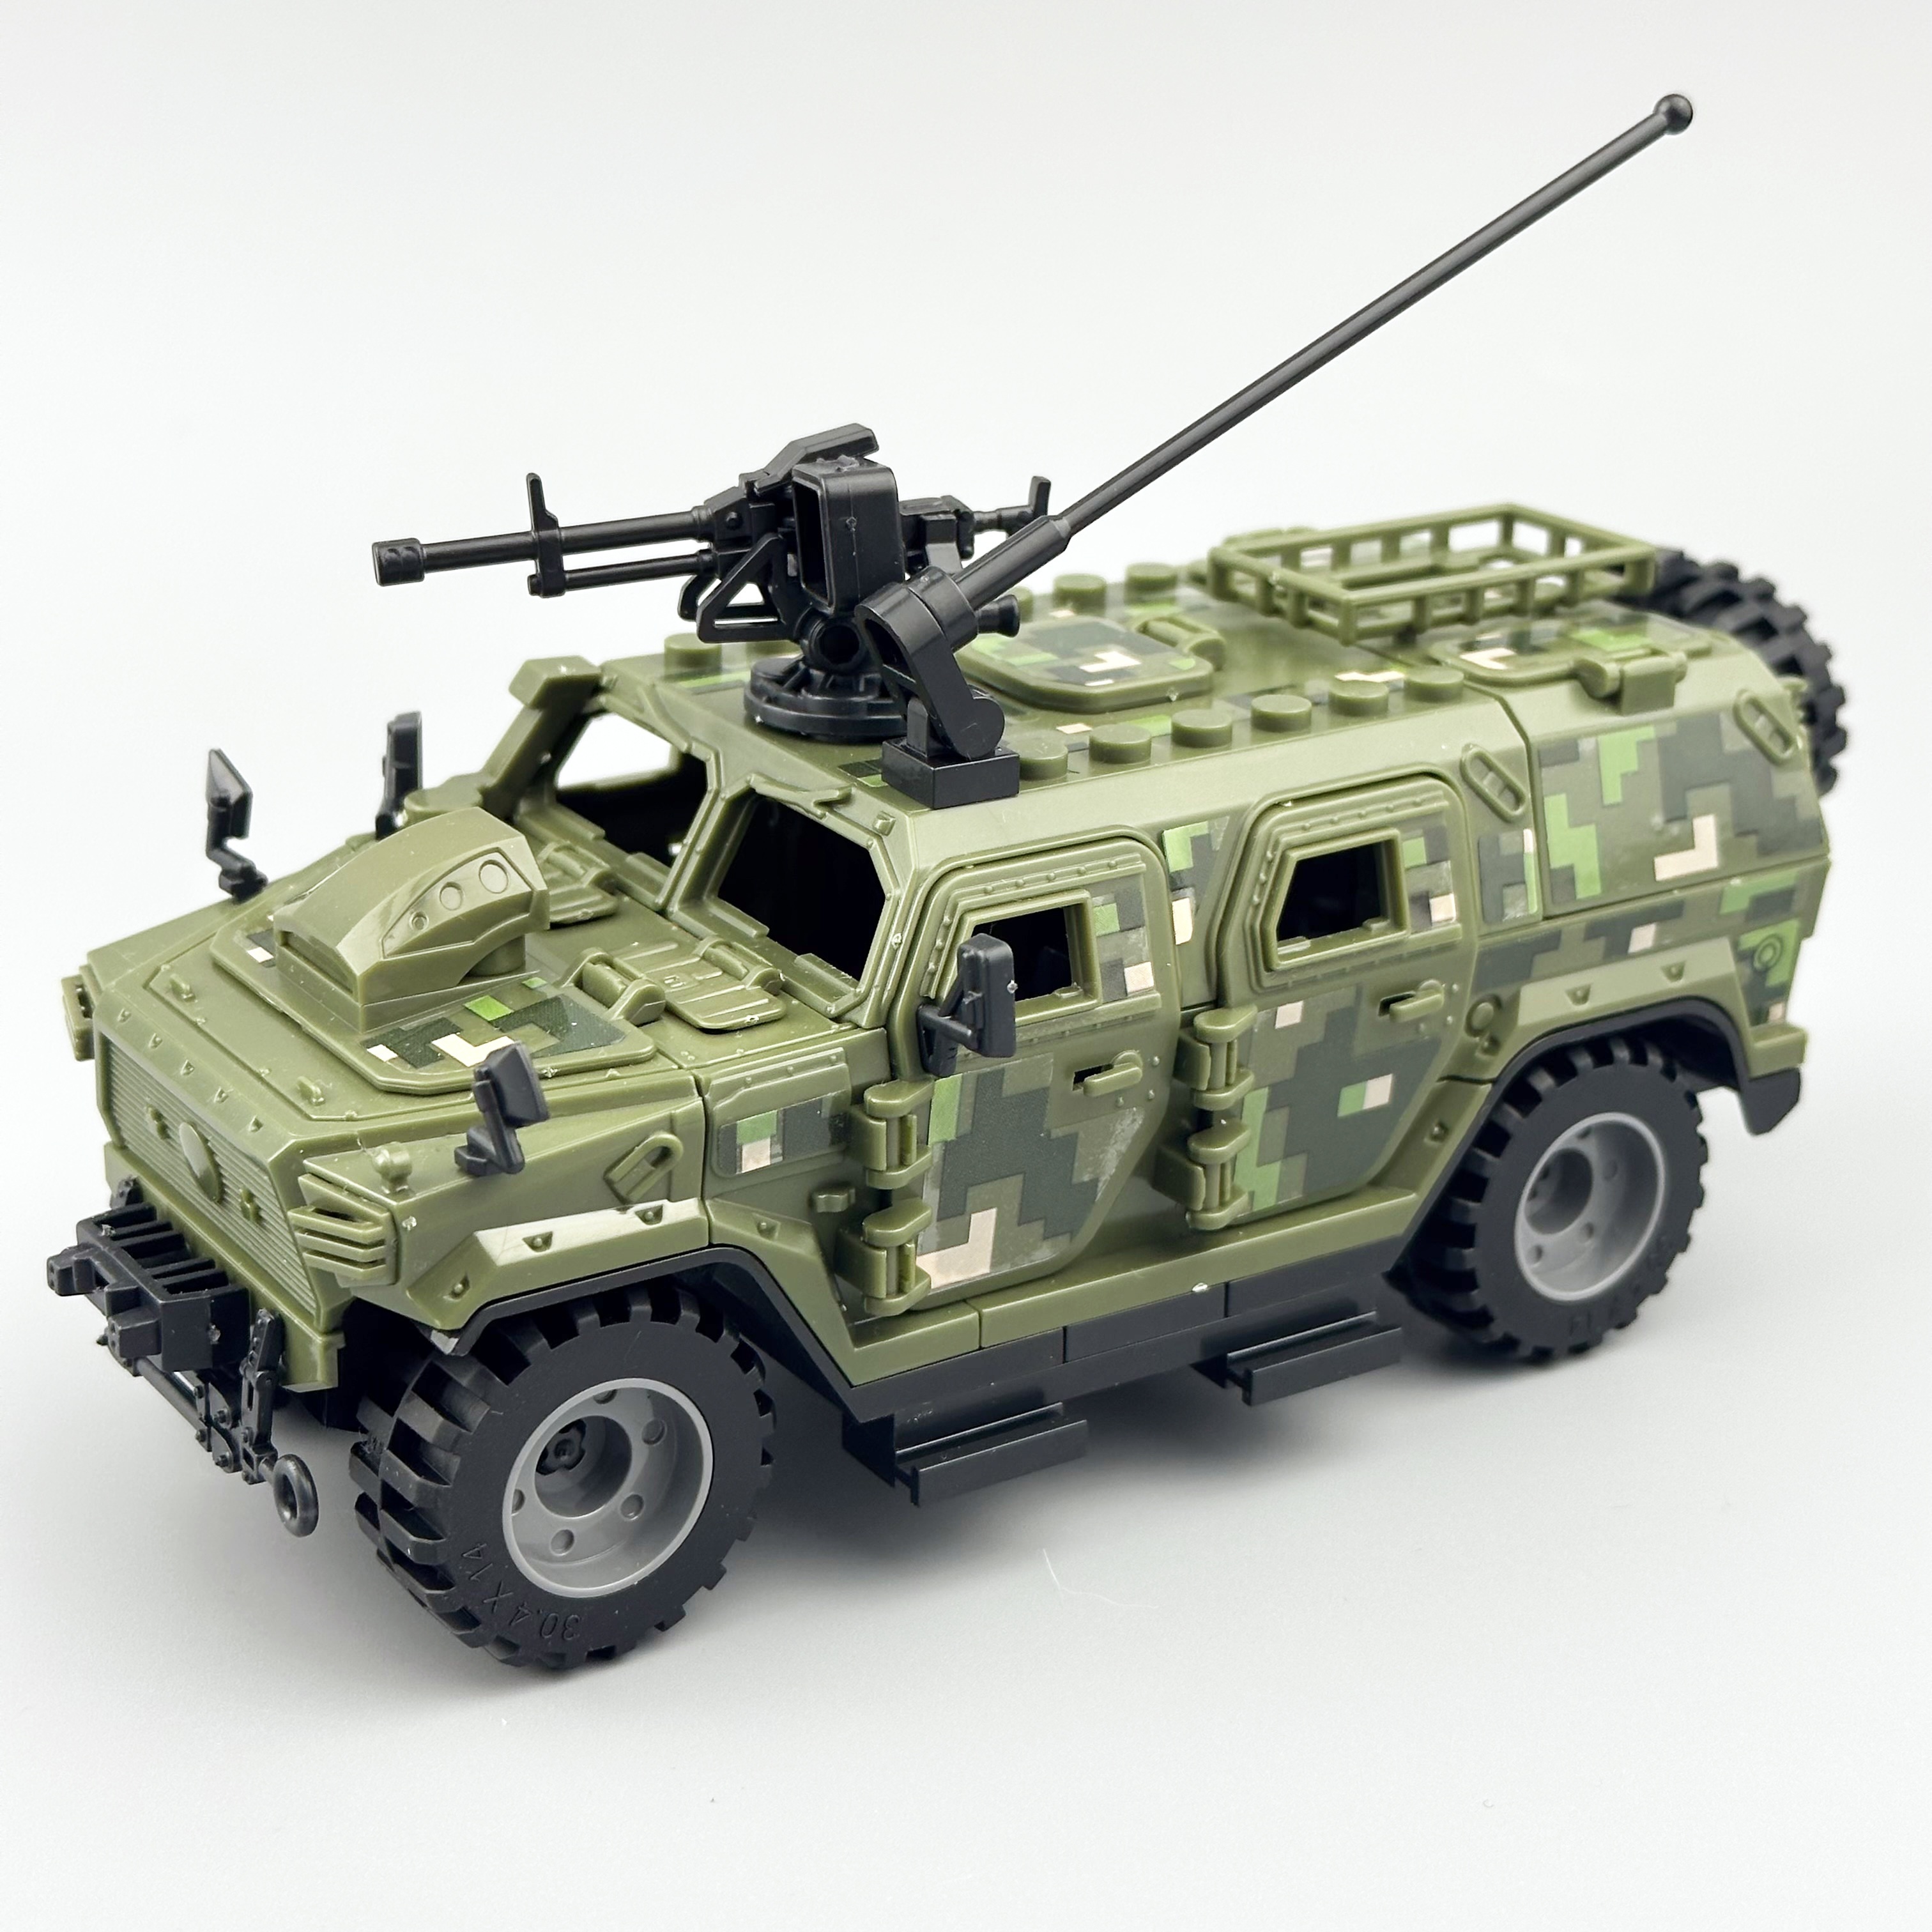 

Puzzle Building Blocks Camouflage Military Armored Vehicle Toy Model Easter Gift Back-to-school Gift 140pcs